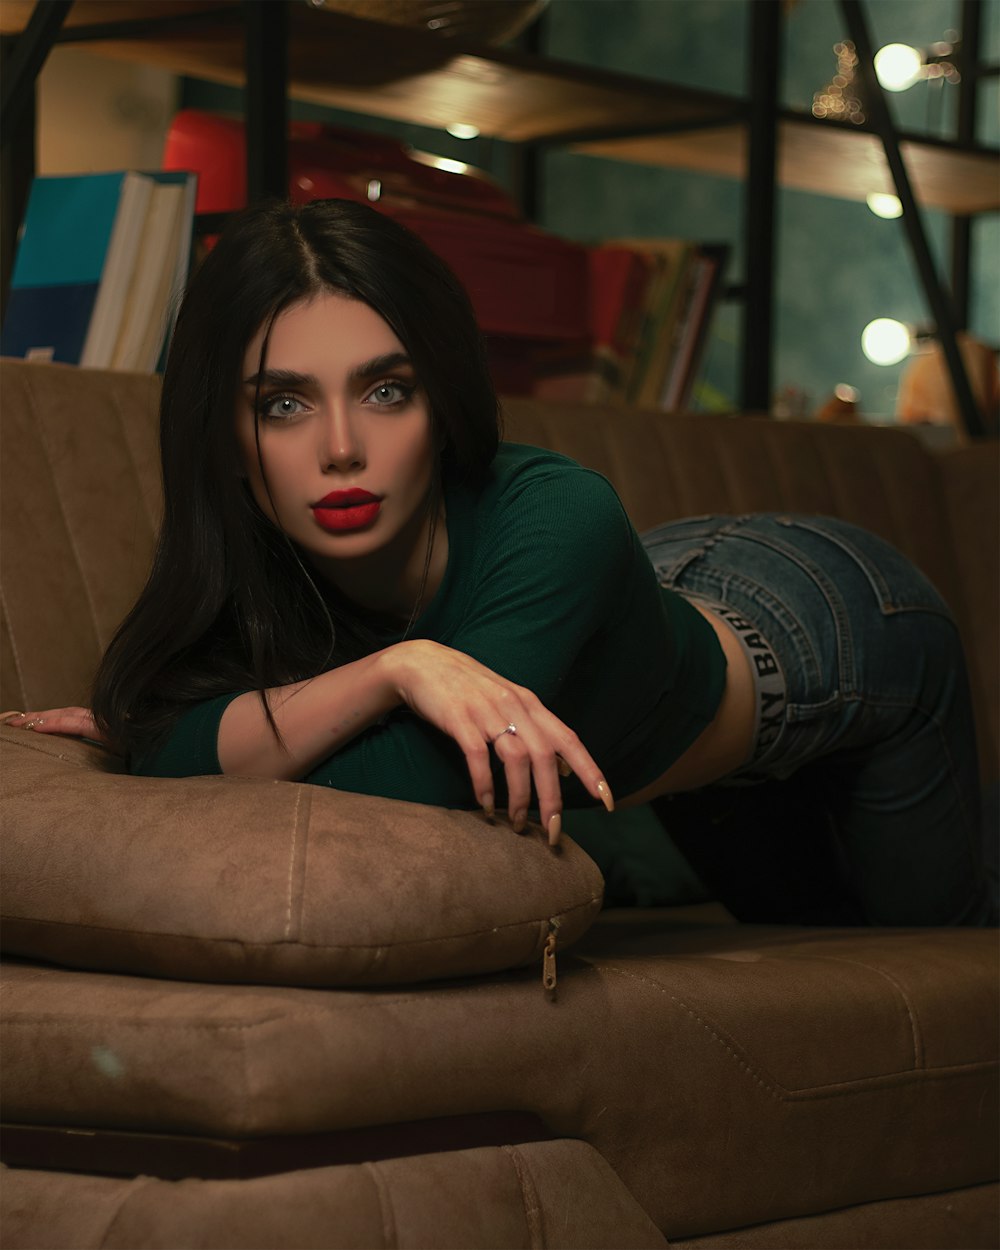 woman in black shirt and blue denim jeans sitting on brown leather couch